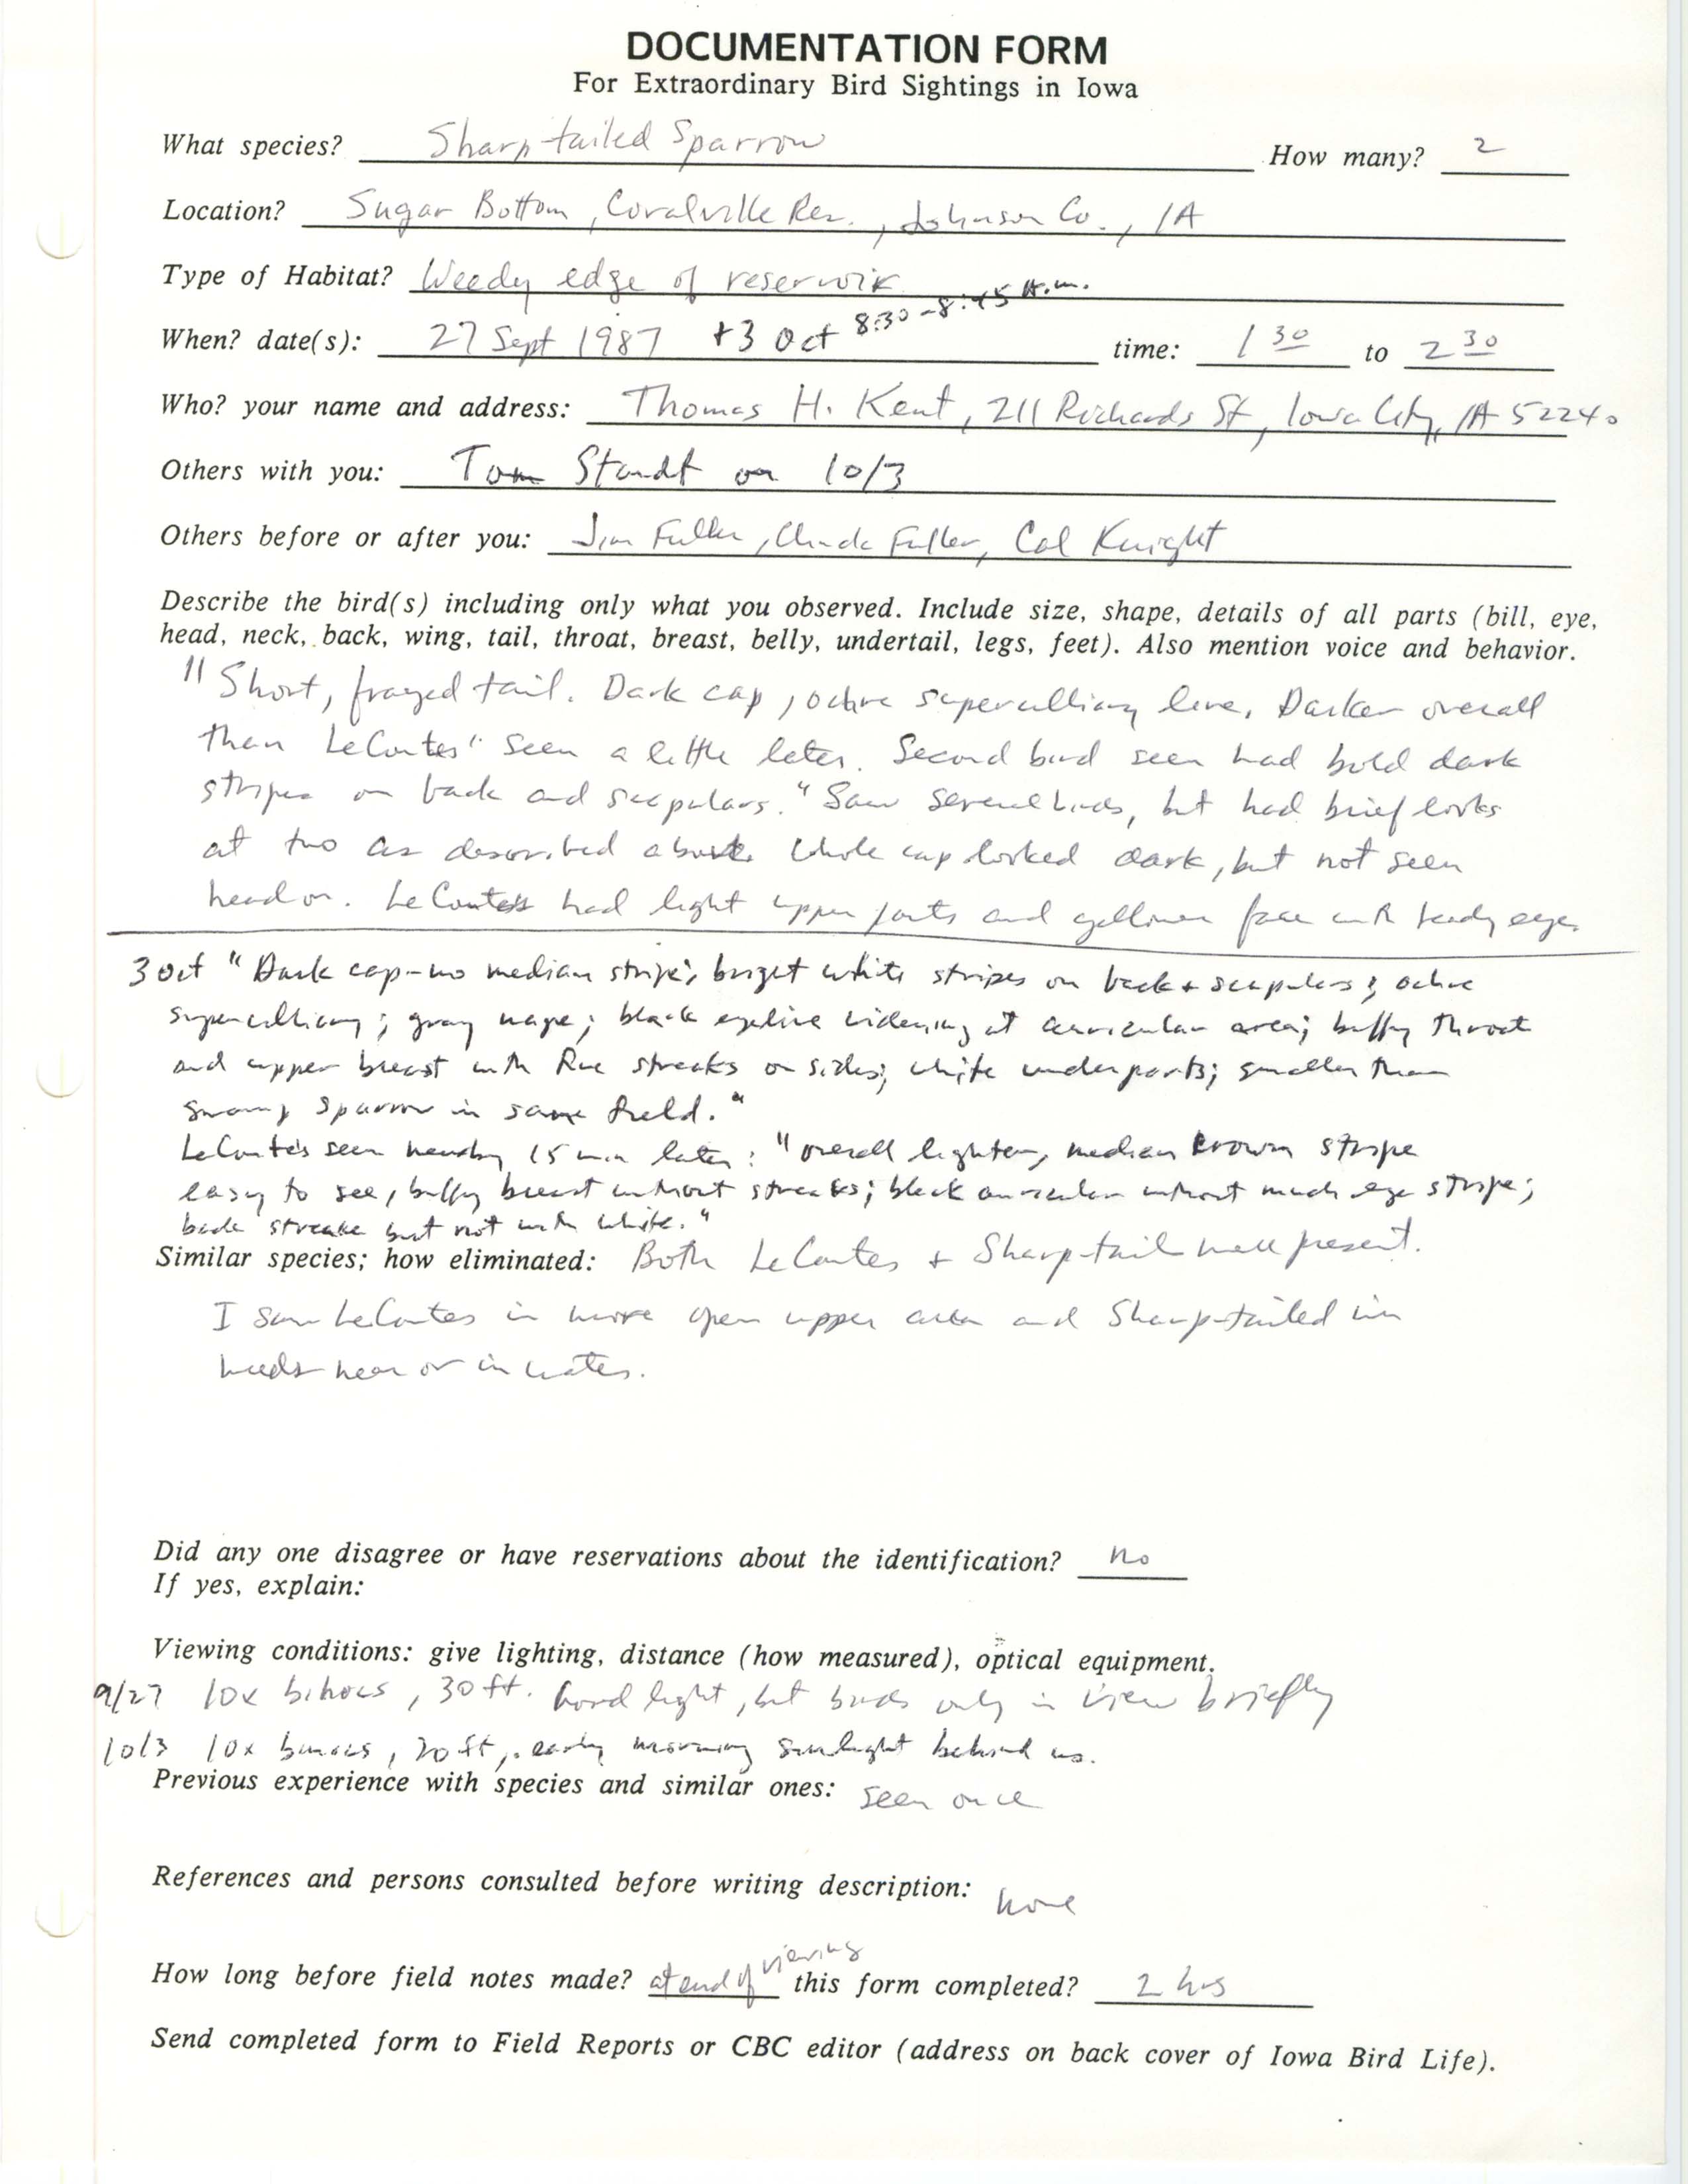 Rare bird documentation form for Sharp-tailed Sparrow at Sugar Bottom Recreation Area at Coralville Reservoir in 1987